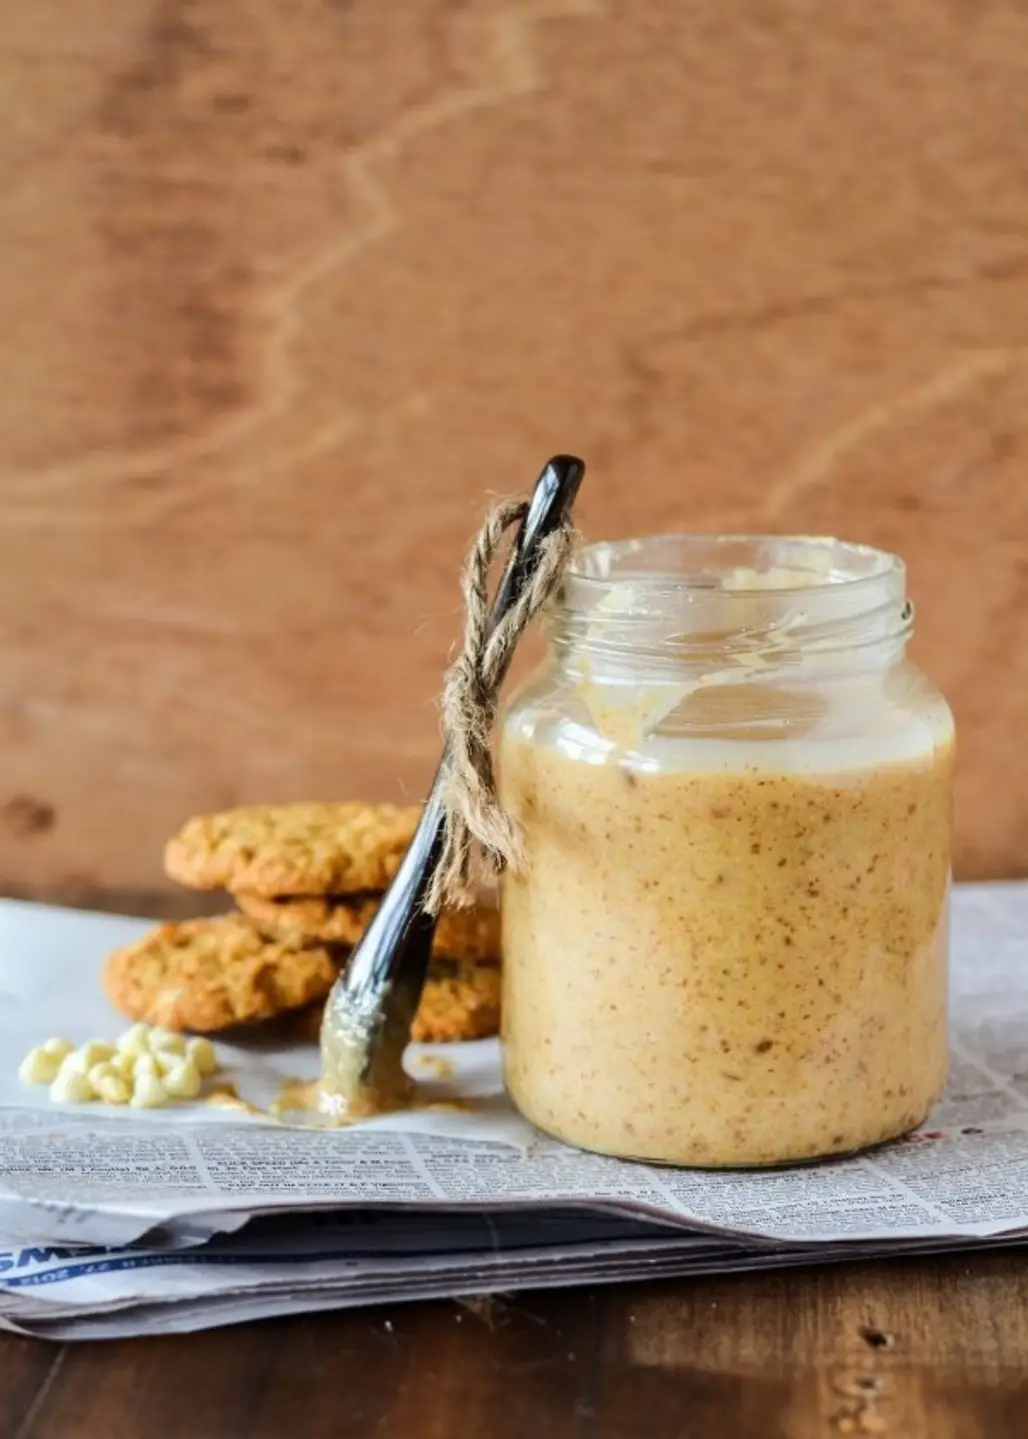 Conventional Nut Butters